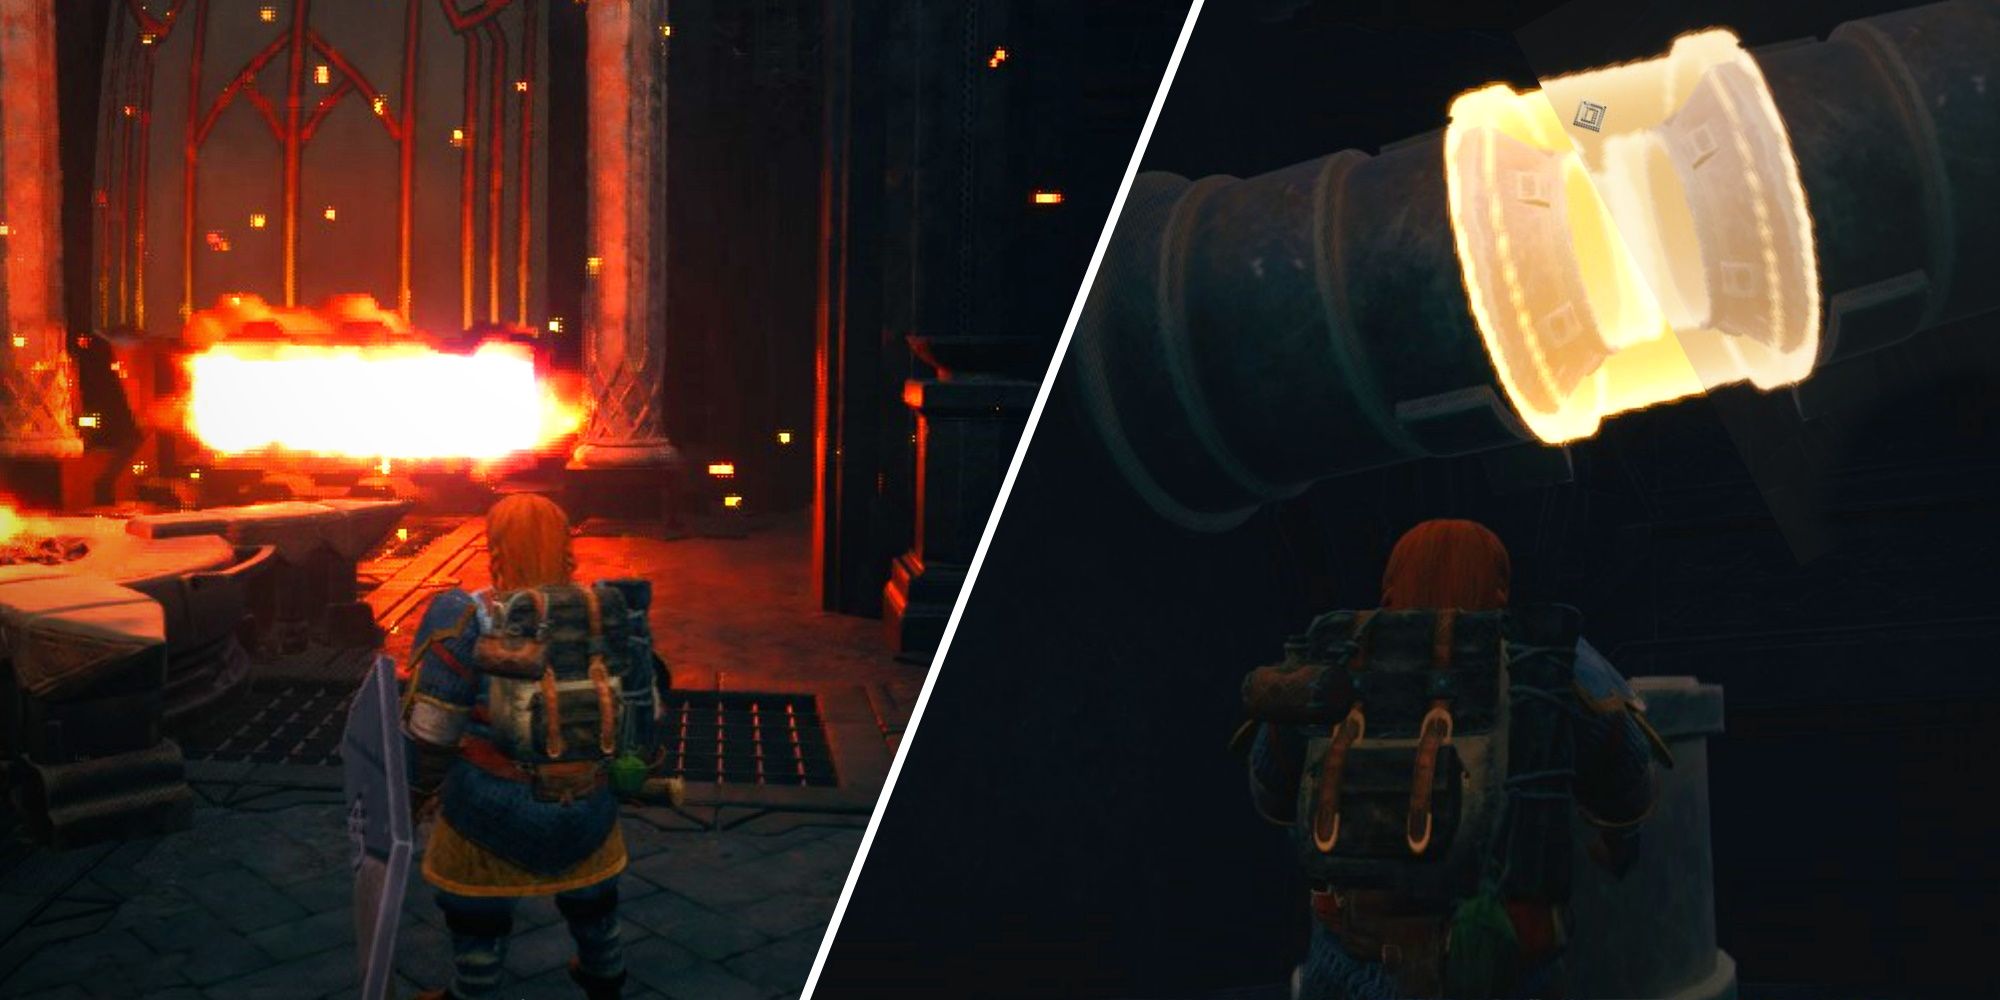 Lord of the Rings Return to Moria, A split image showing the Great Forge as well as repairing the pipe for that forge